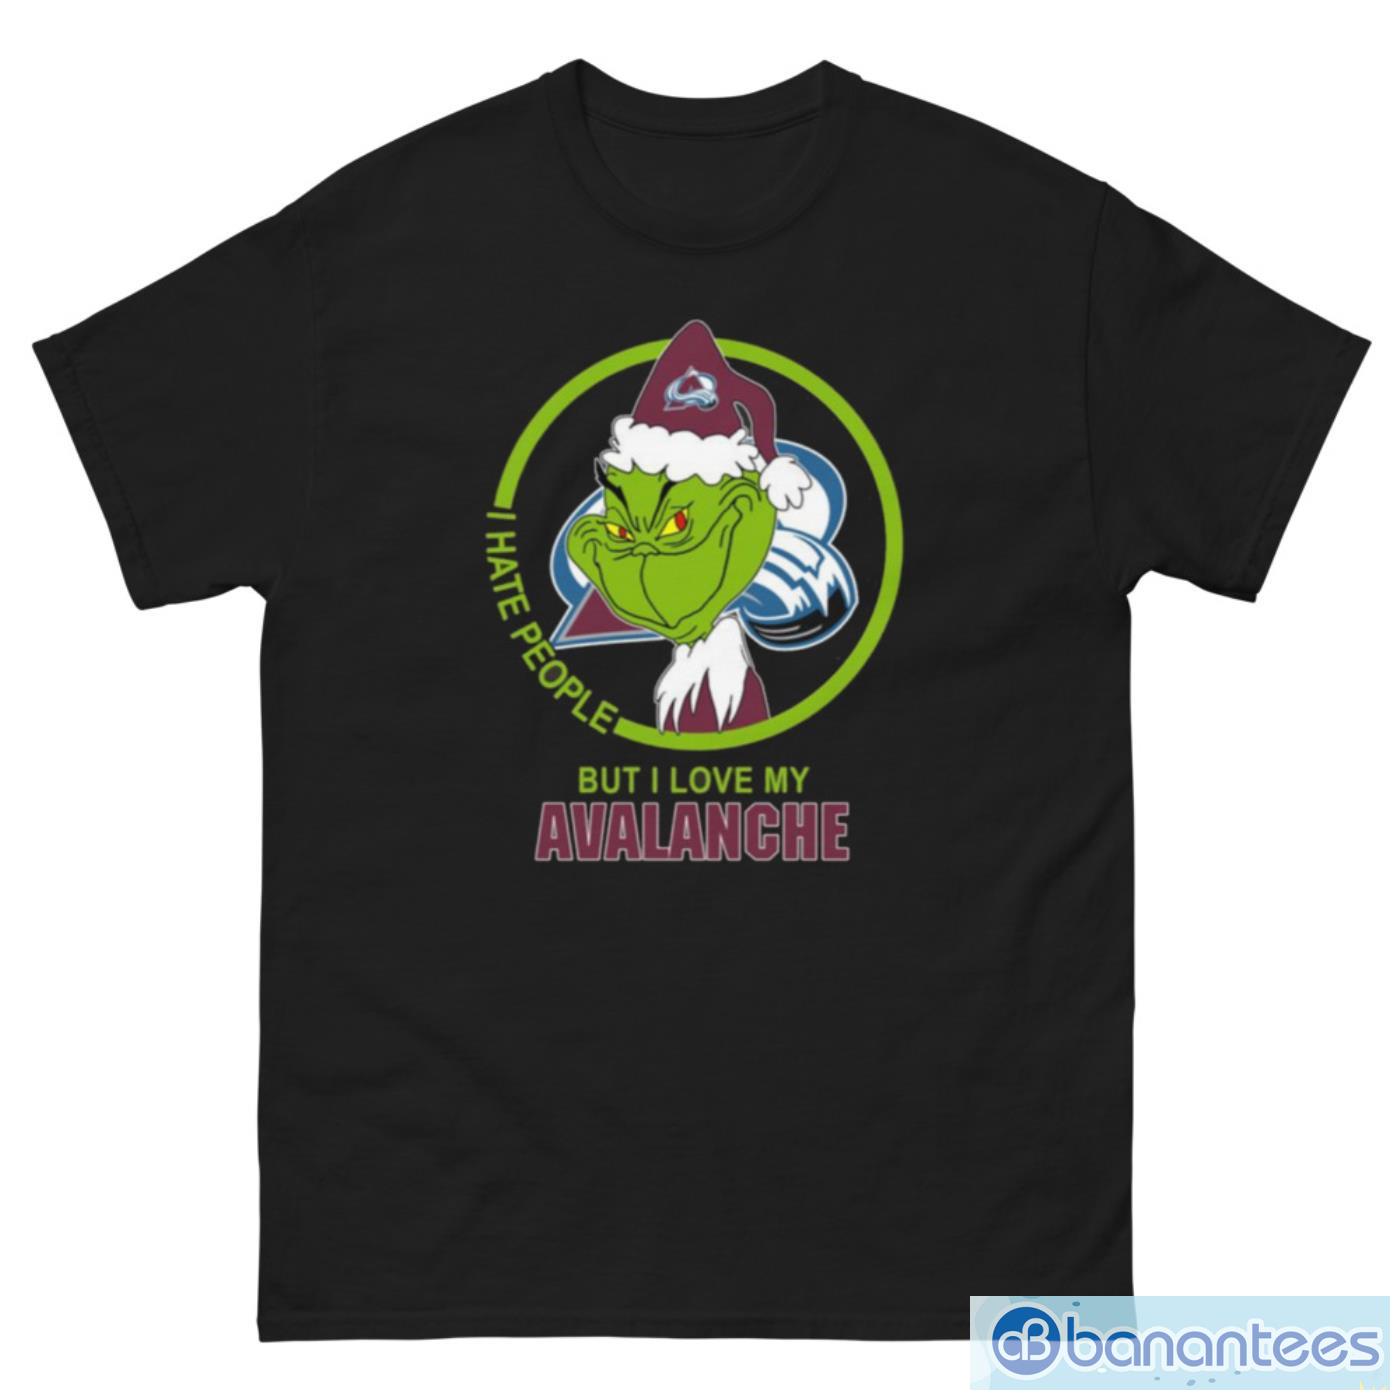 Colorado Avalanche NHL Christmas Grinch I Hate People But I Love My Favorite Hockey Team T Shirt - G500 Men’s Classic Tee